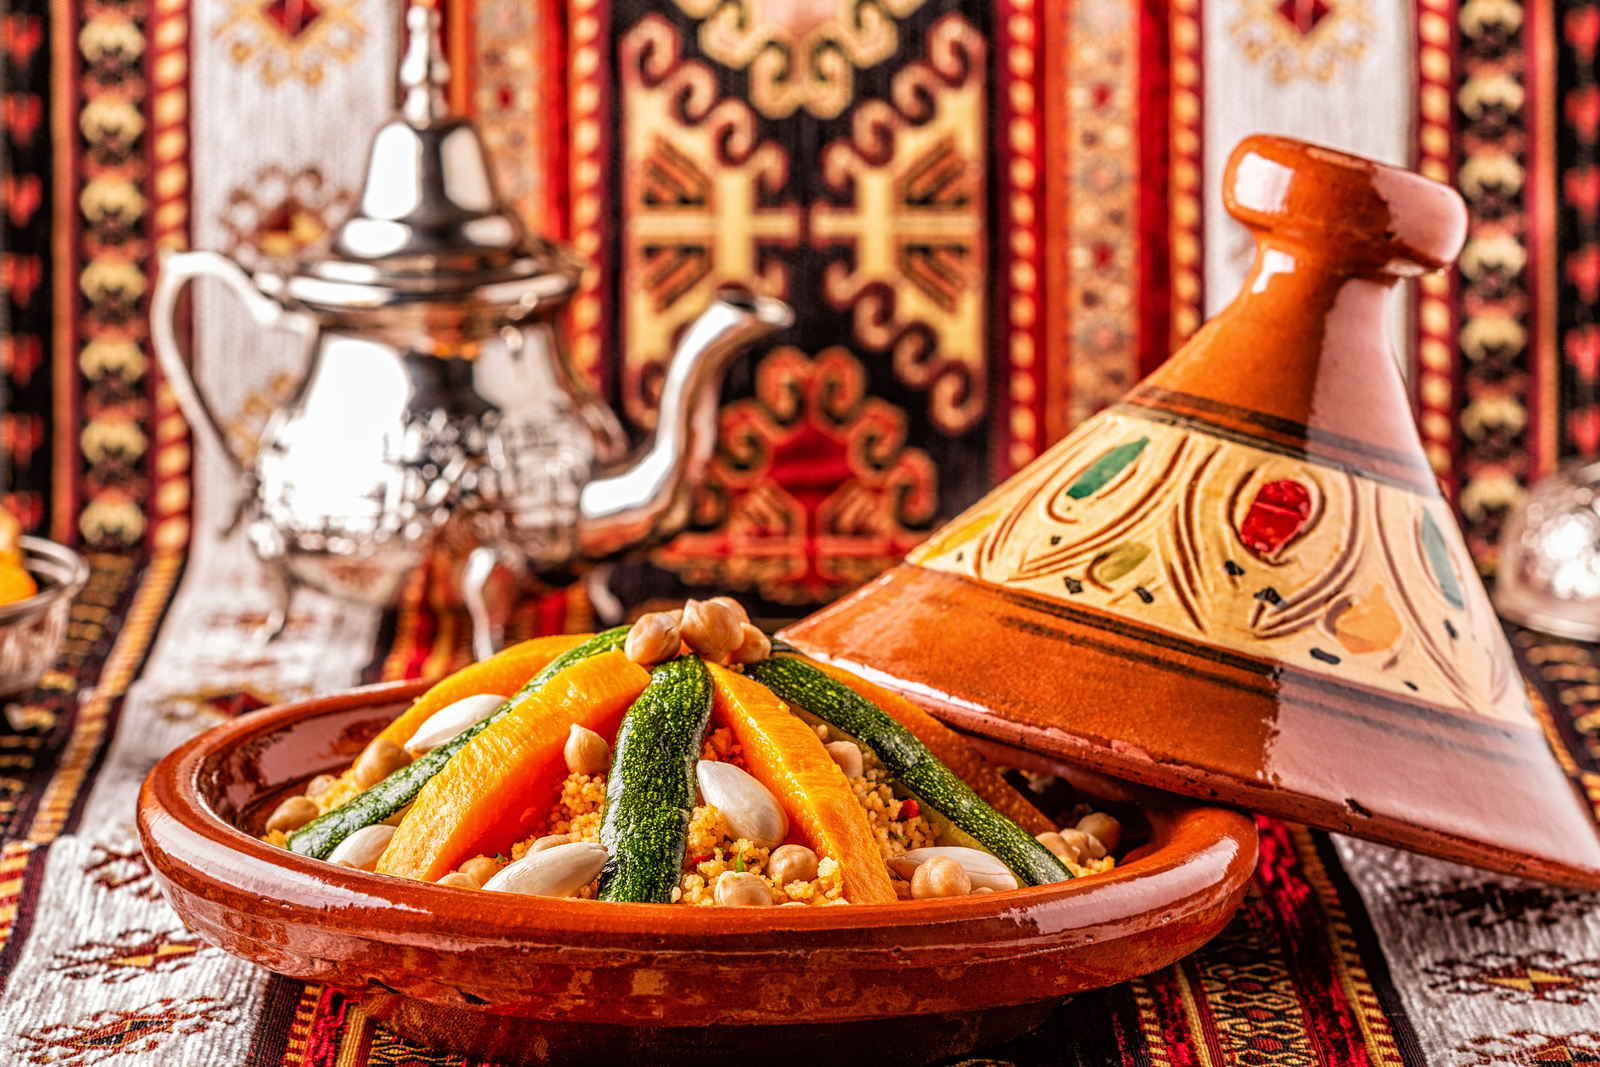 Morocco foodie tours in Marrakech to taste local Moroccan dishes & Cuisine